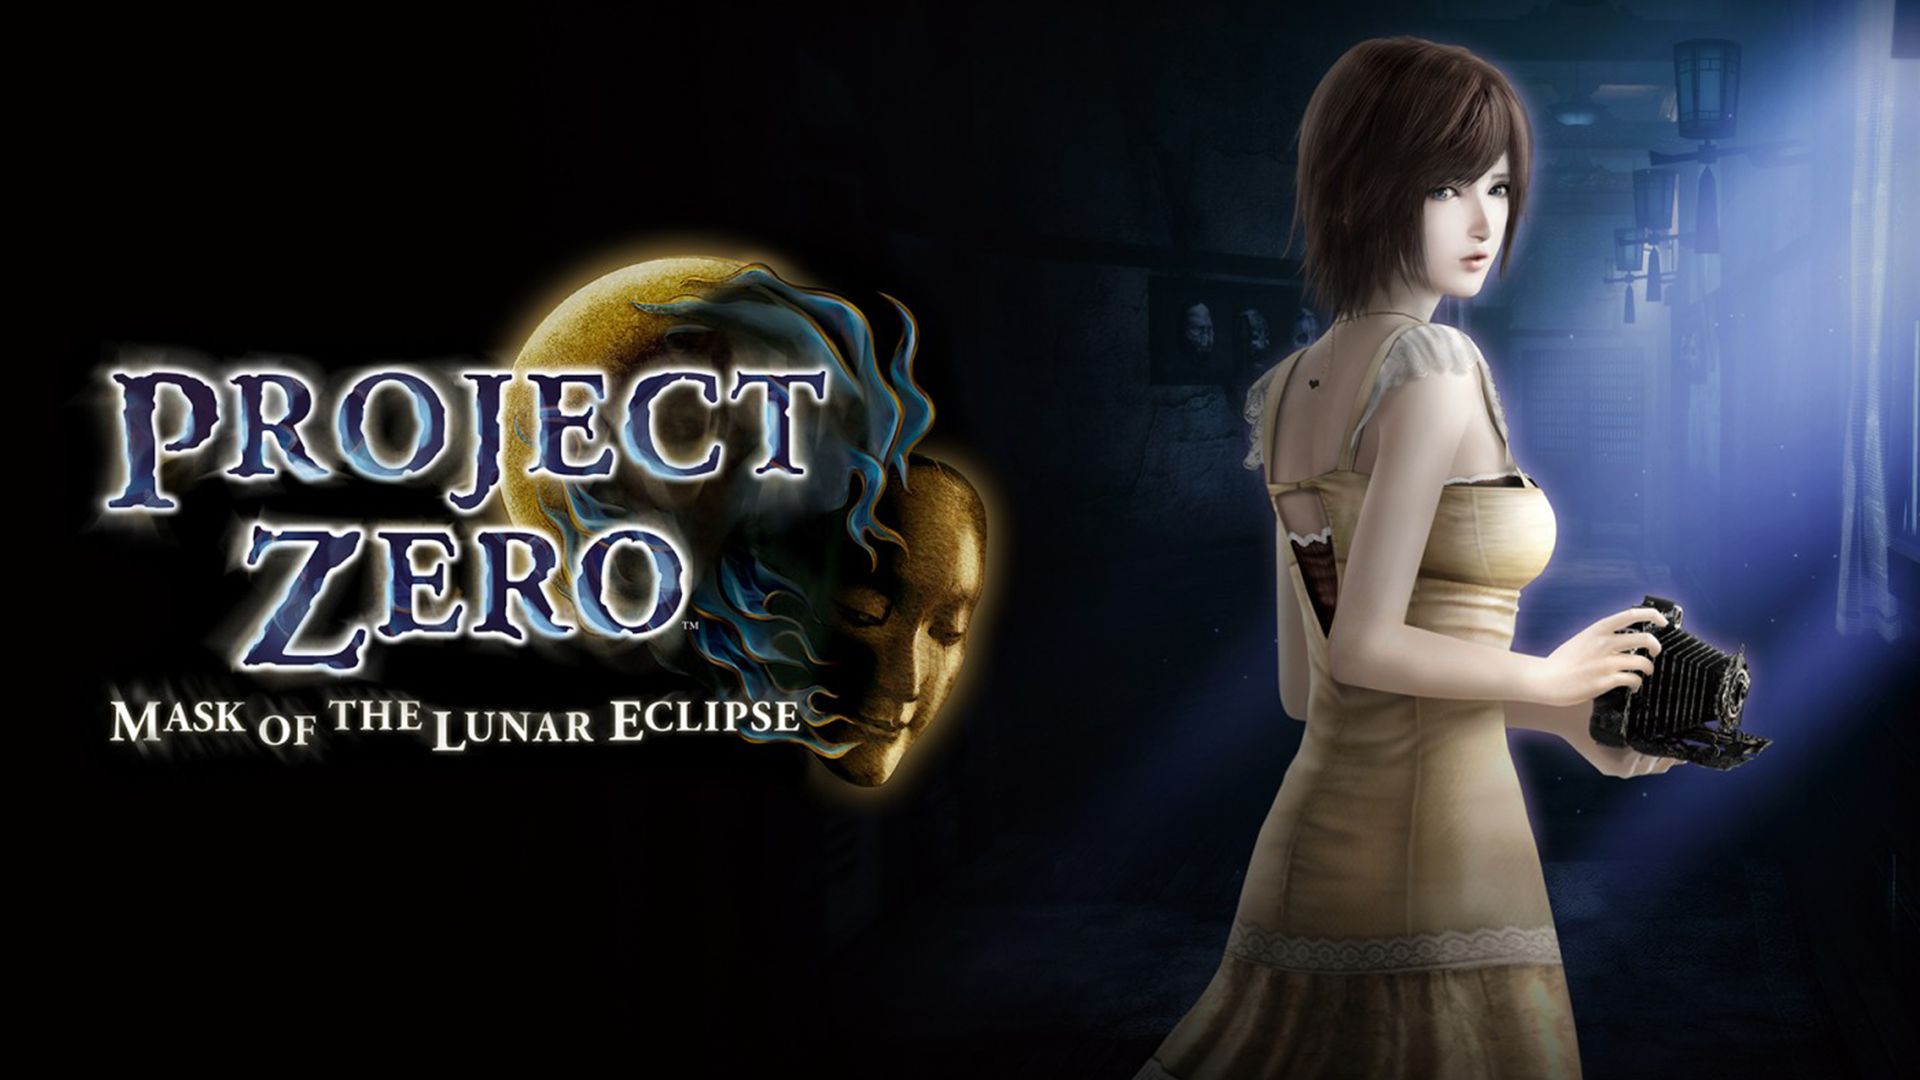 PROJECT ZERO: Mask of the Lunar Eclipse